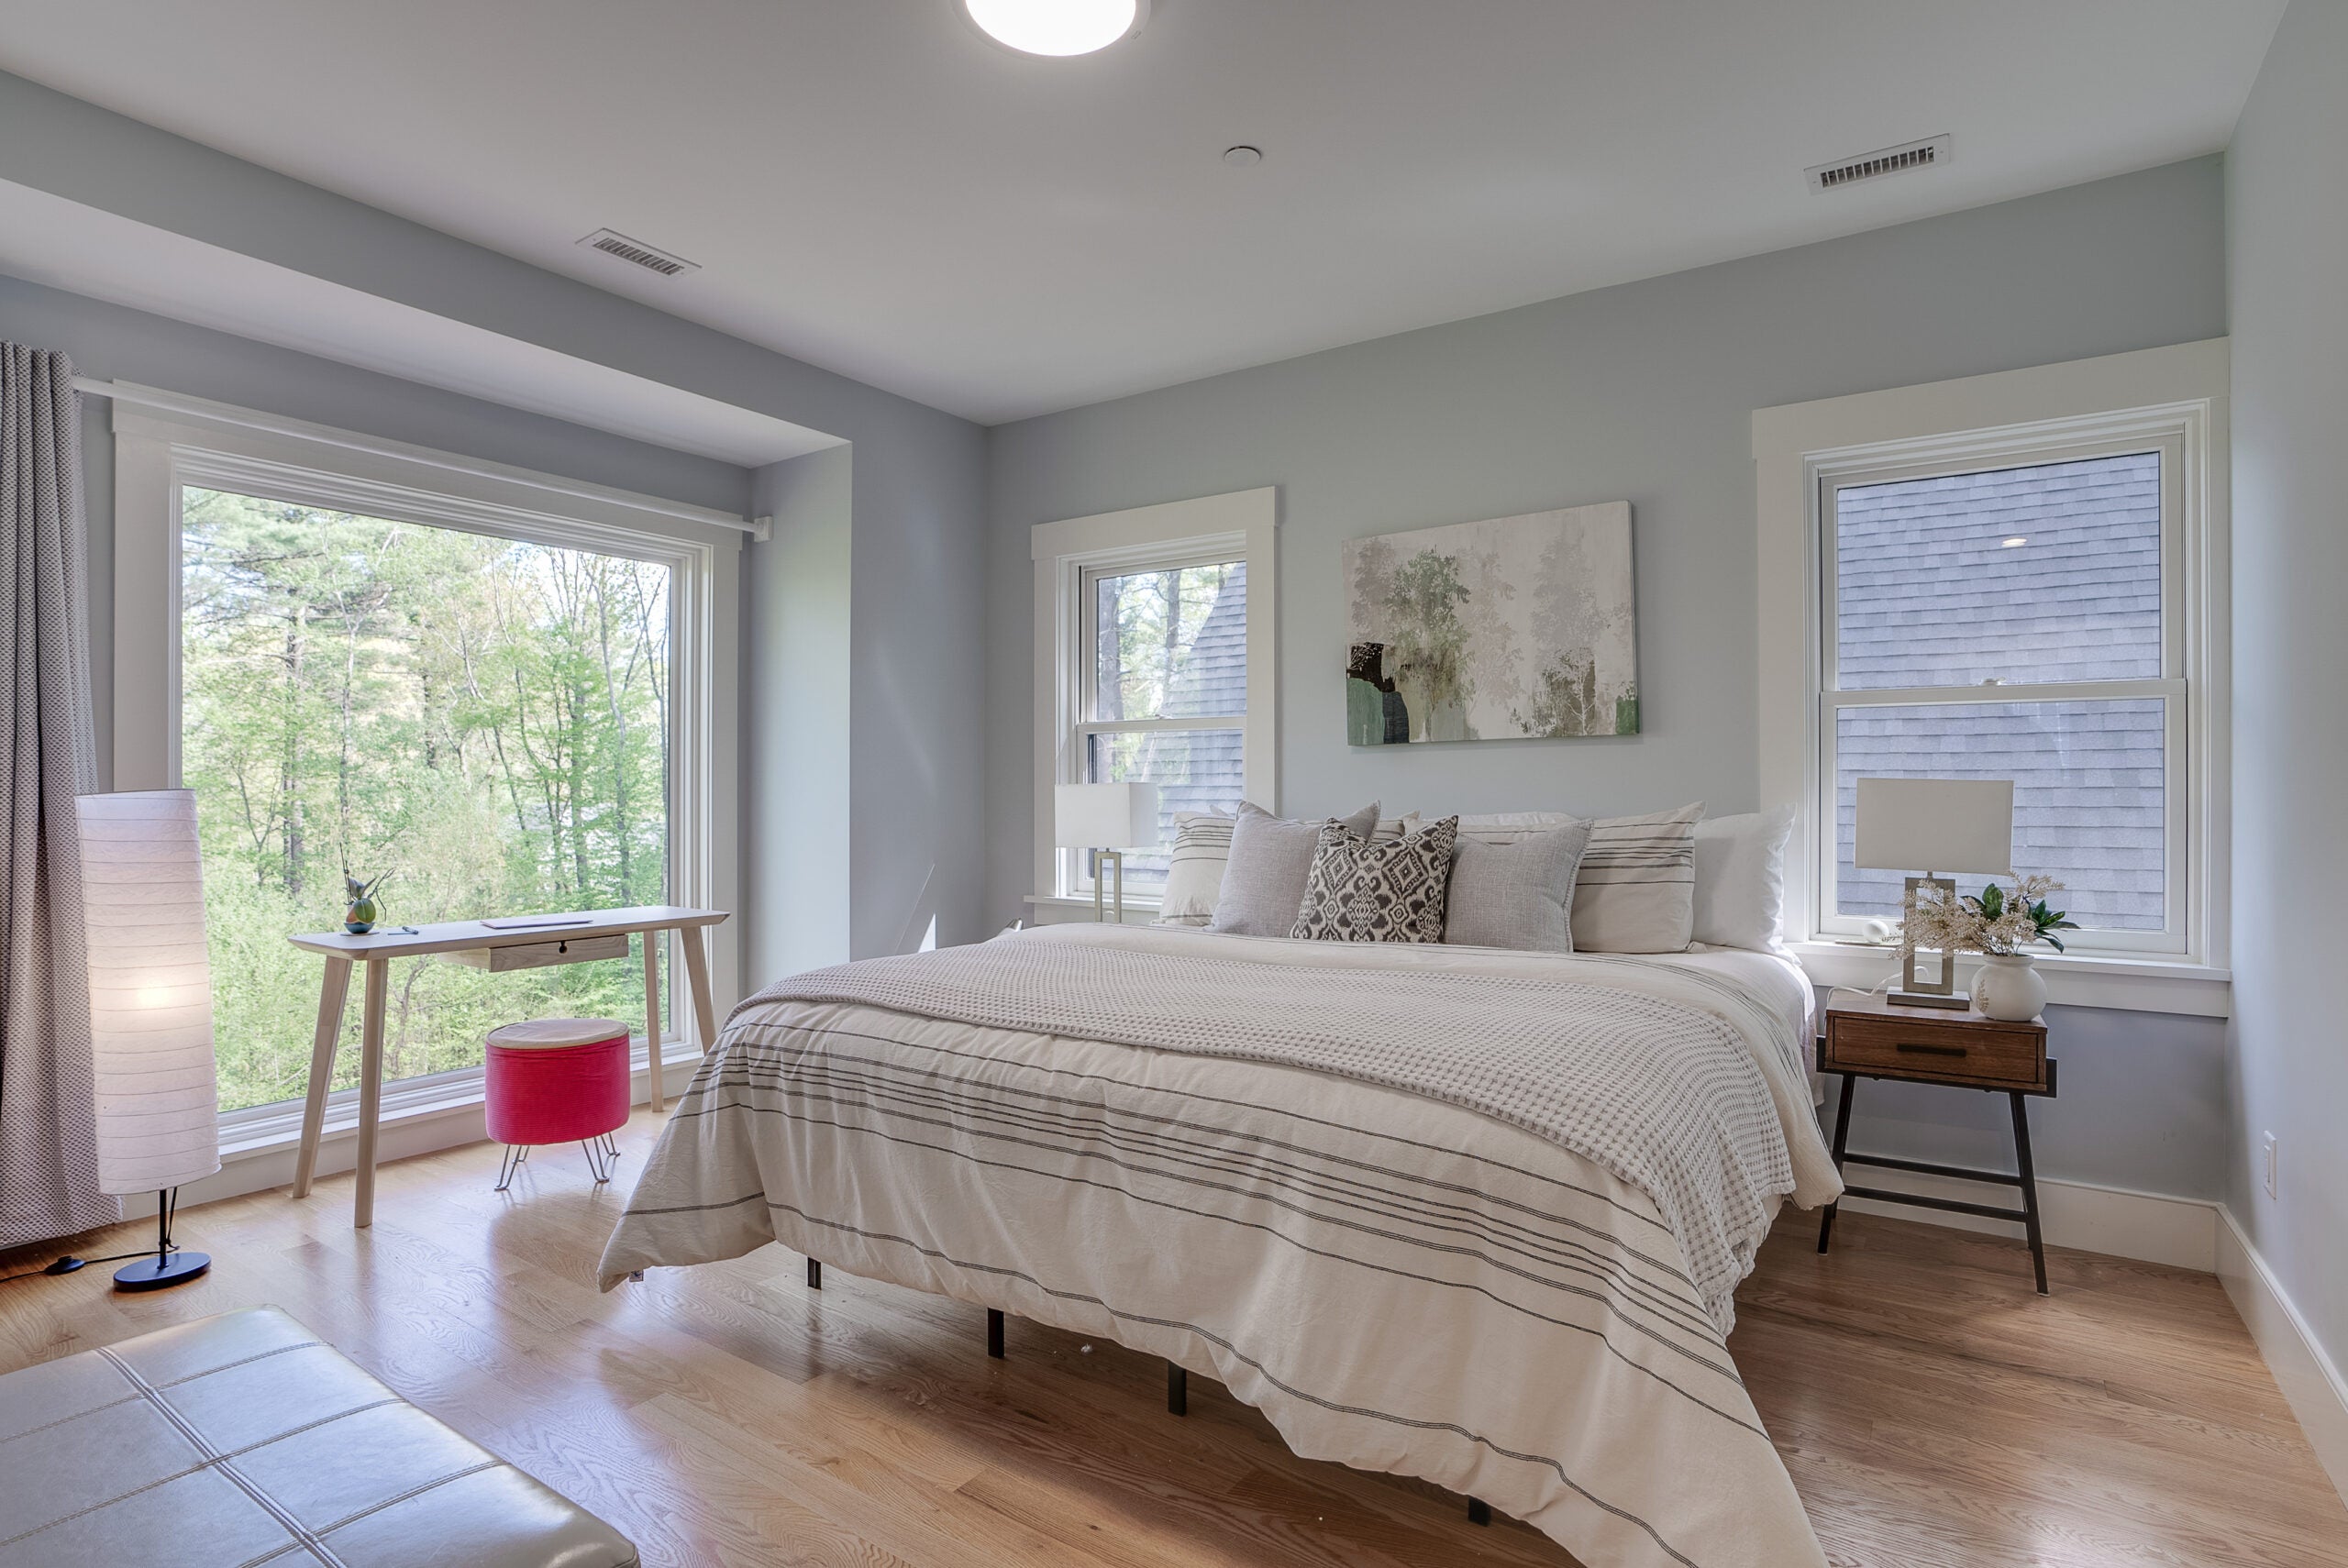 A bedroom with two double-hung windows, gray walls, wood flooring, and a big picture window. A desk is set before the window.